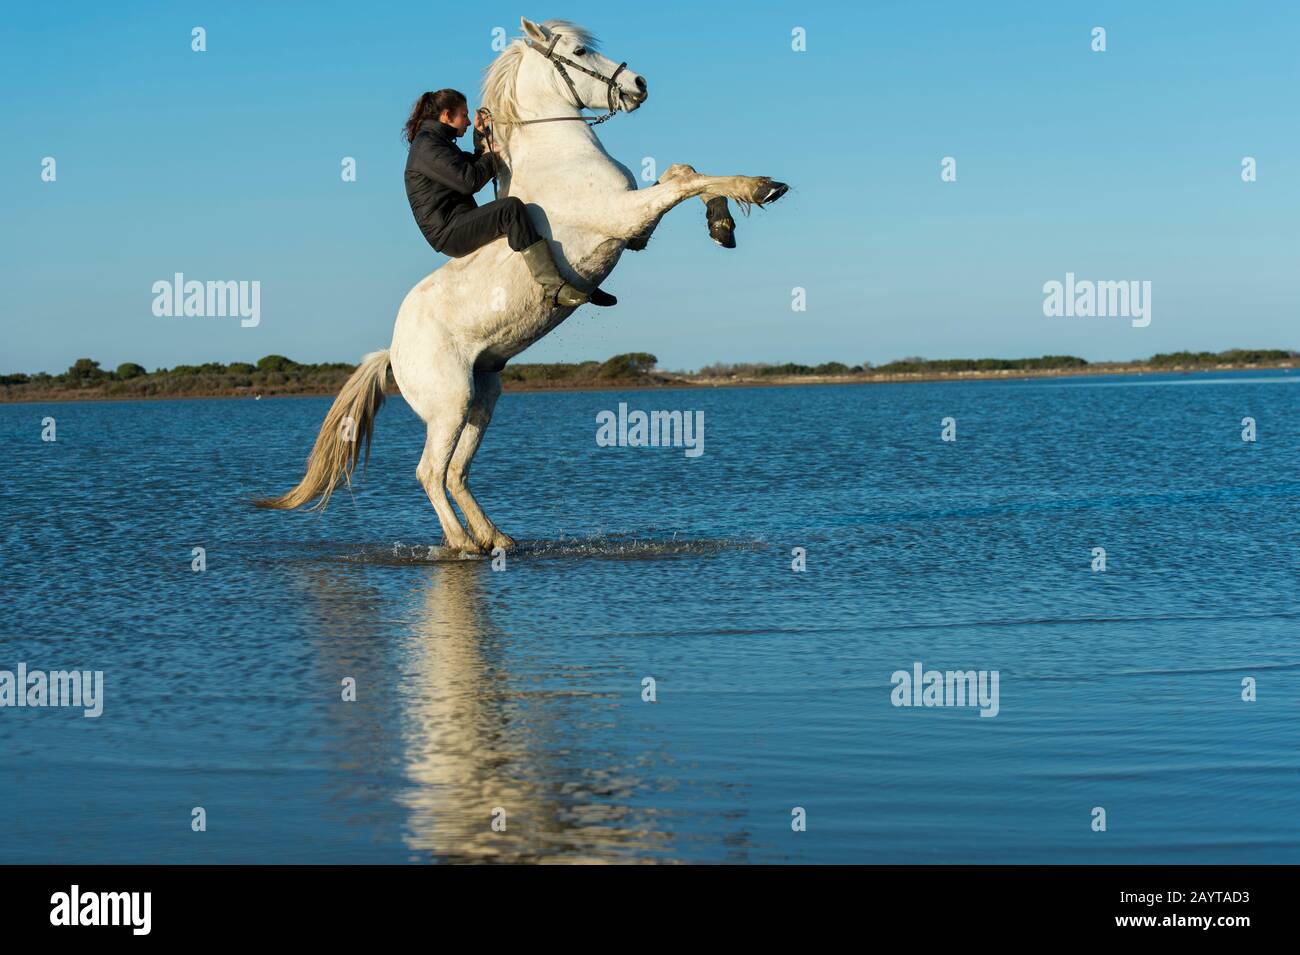 A Guardian (Camargue cowgirl) with her horse rearing up in the marshlands of the Camargue in southern France. Stock Photo